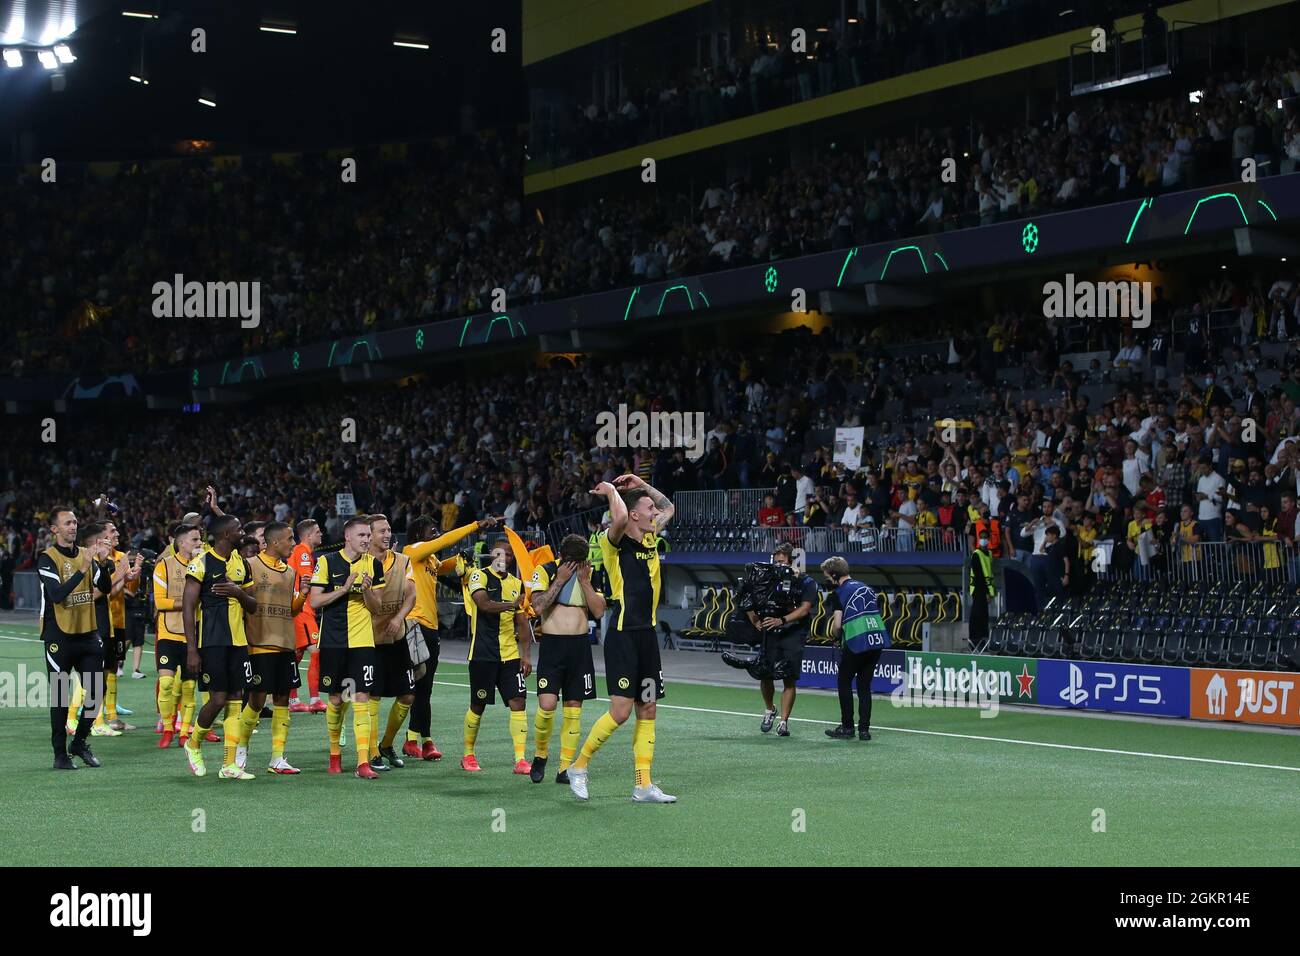 Berne, Switzerland, 14th September 2021. Young Boys players and staff  celebrate in front of the fans following the 3-2 victory in the UEFA  Champions League match at Stadion Wankdorf, Berne. Picture credit